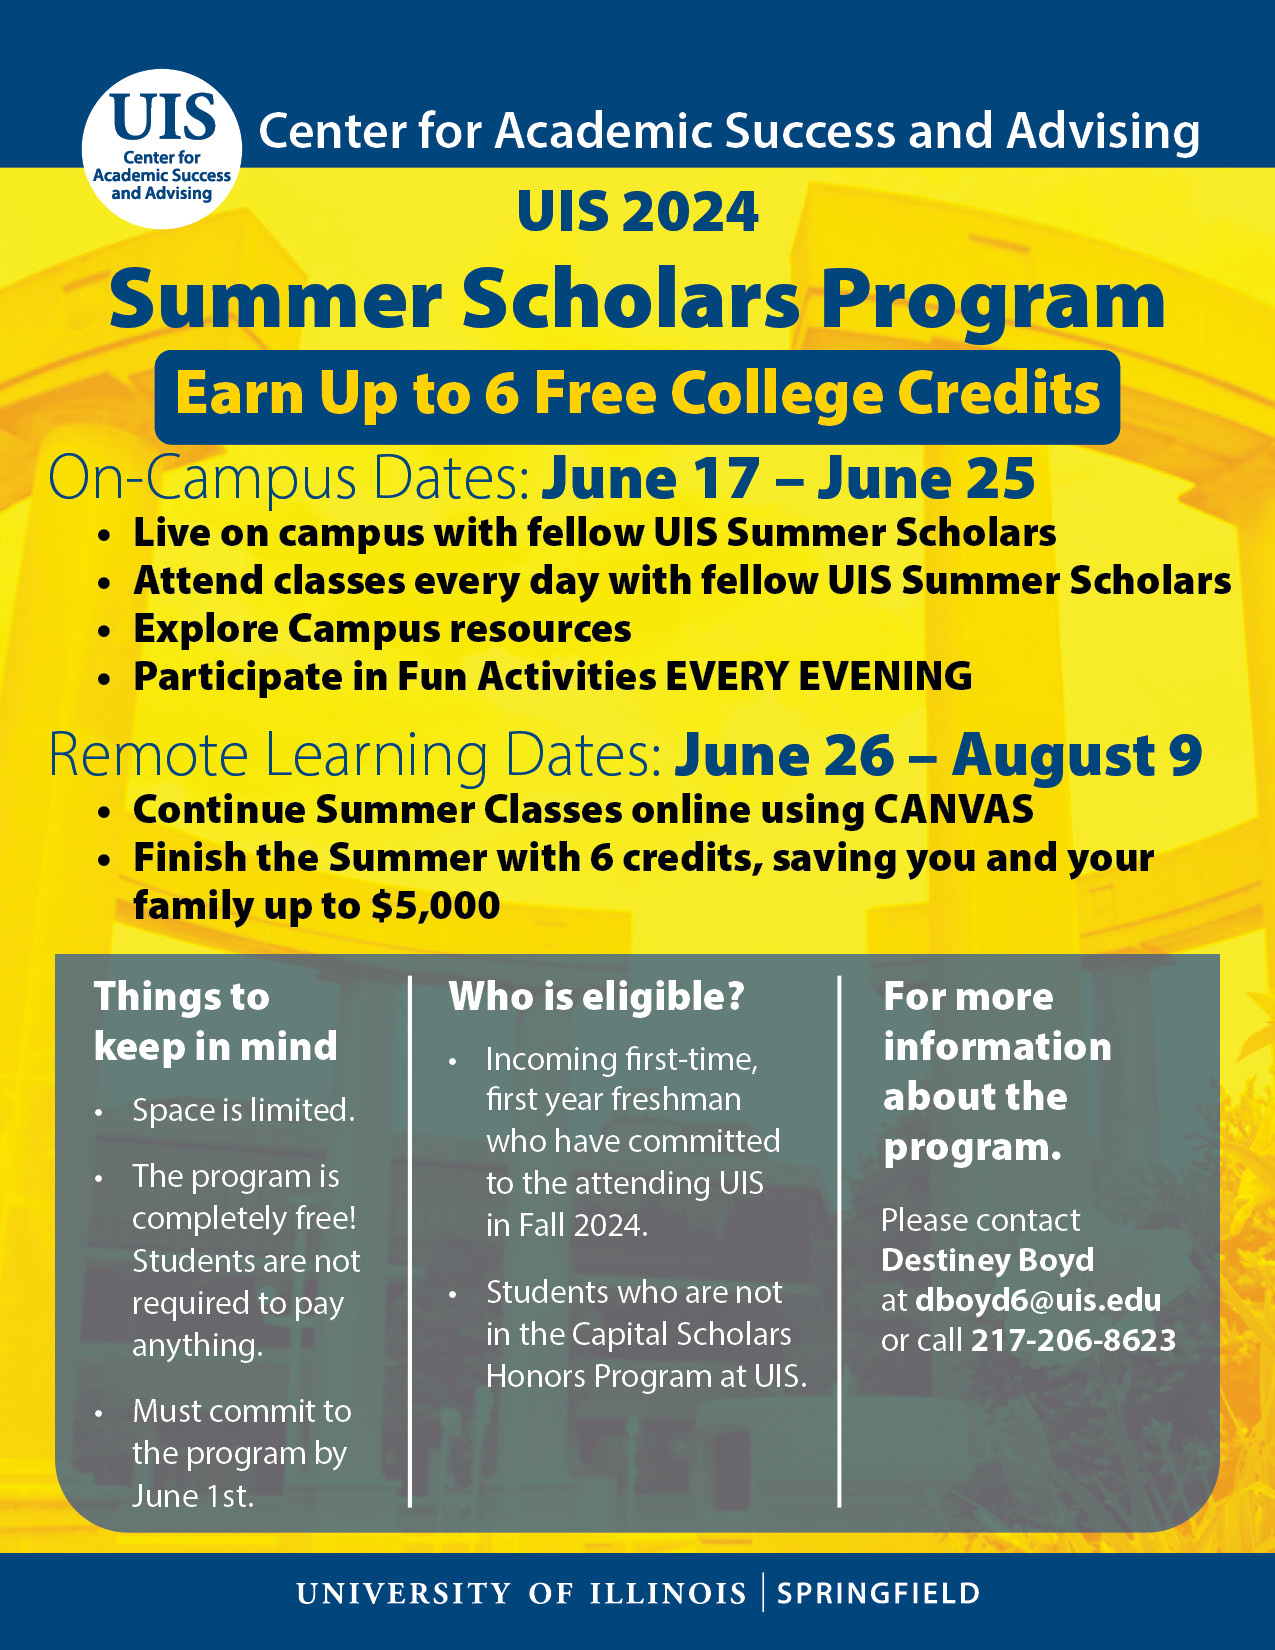 This image provides information about Summer Scholars 2024